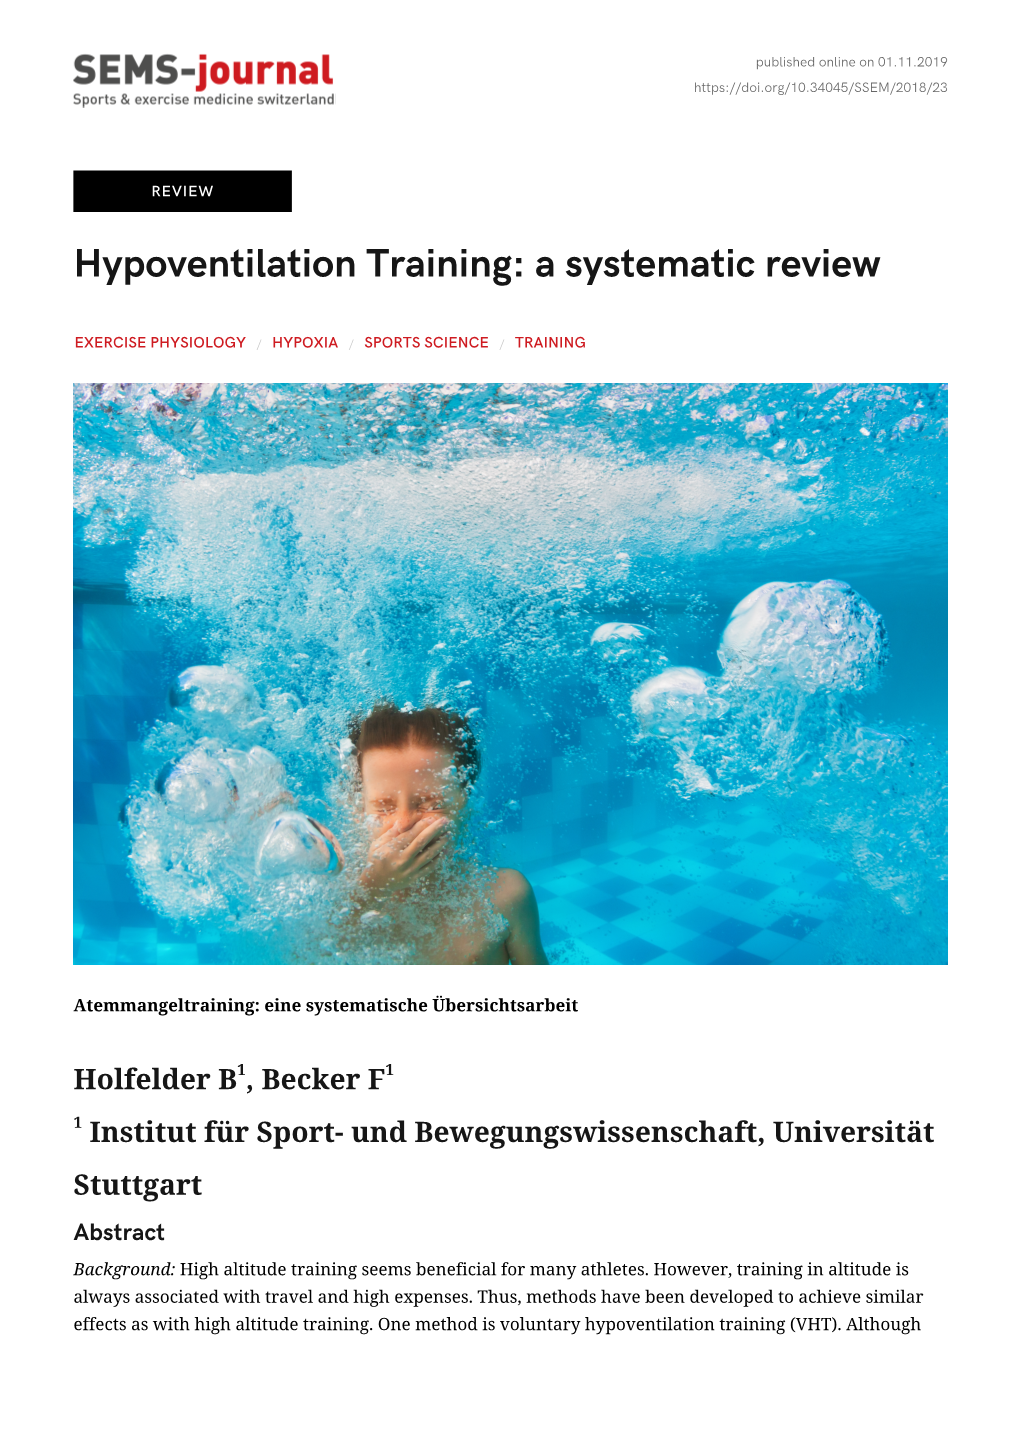 Hypoventilation Training: a Systematic Review